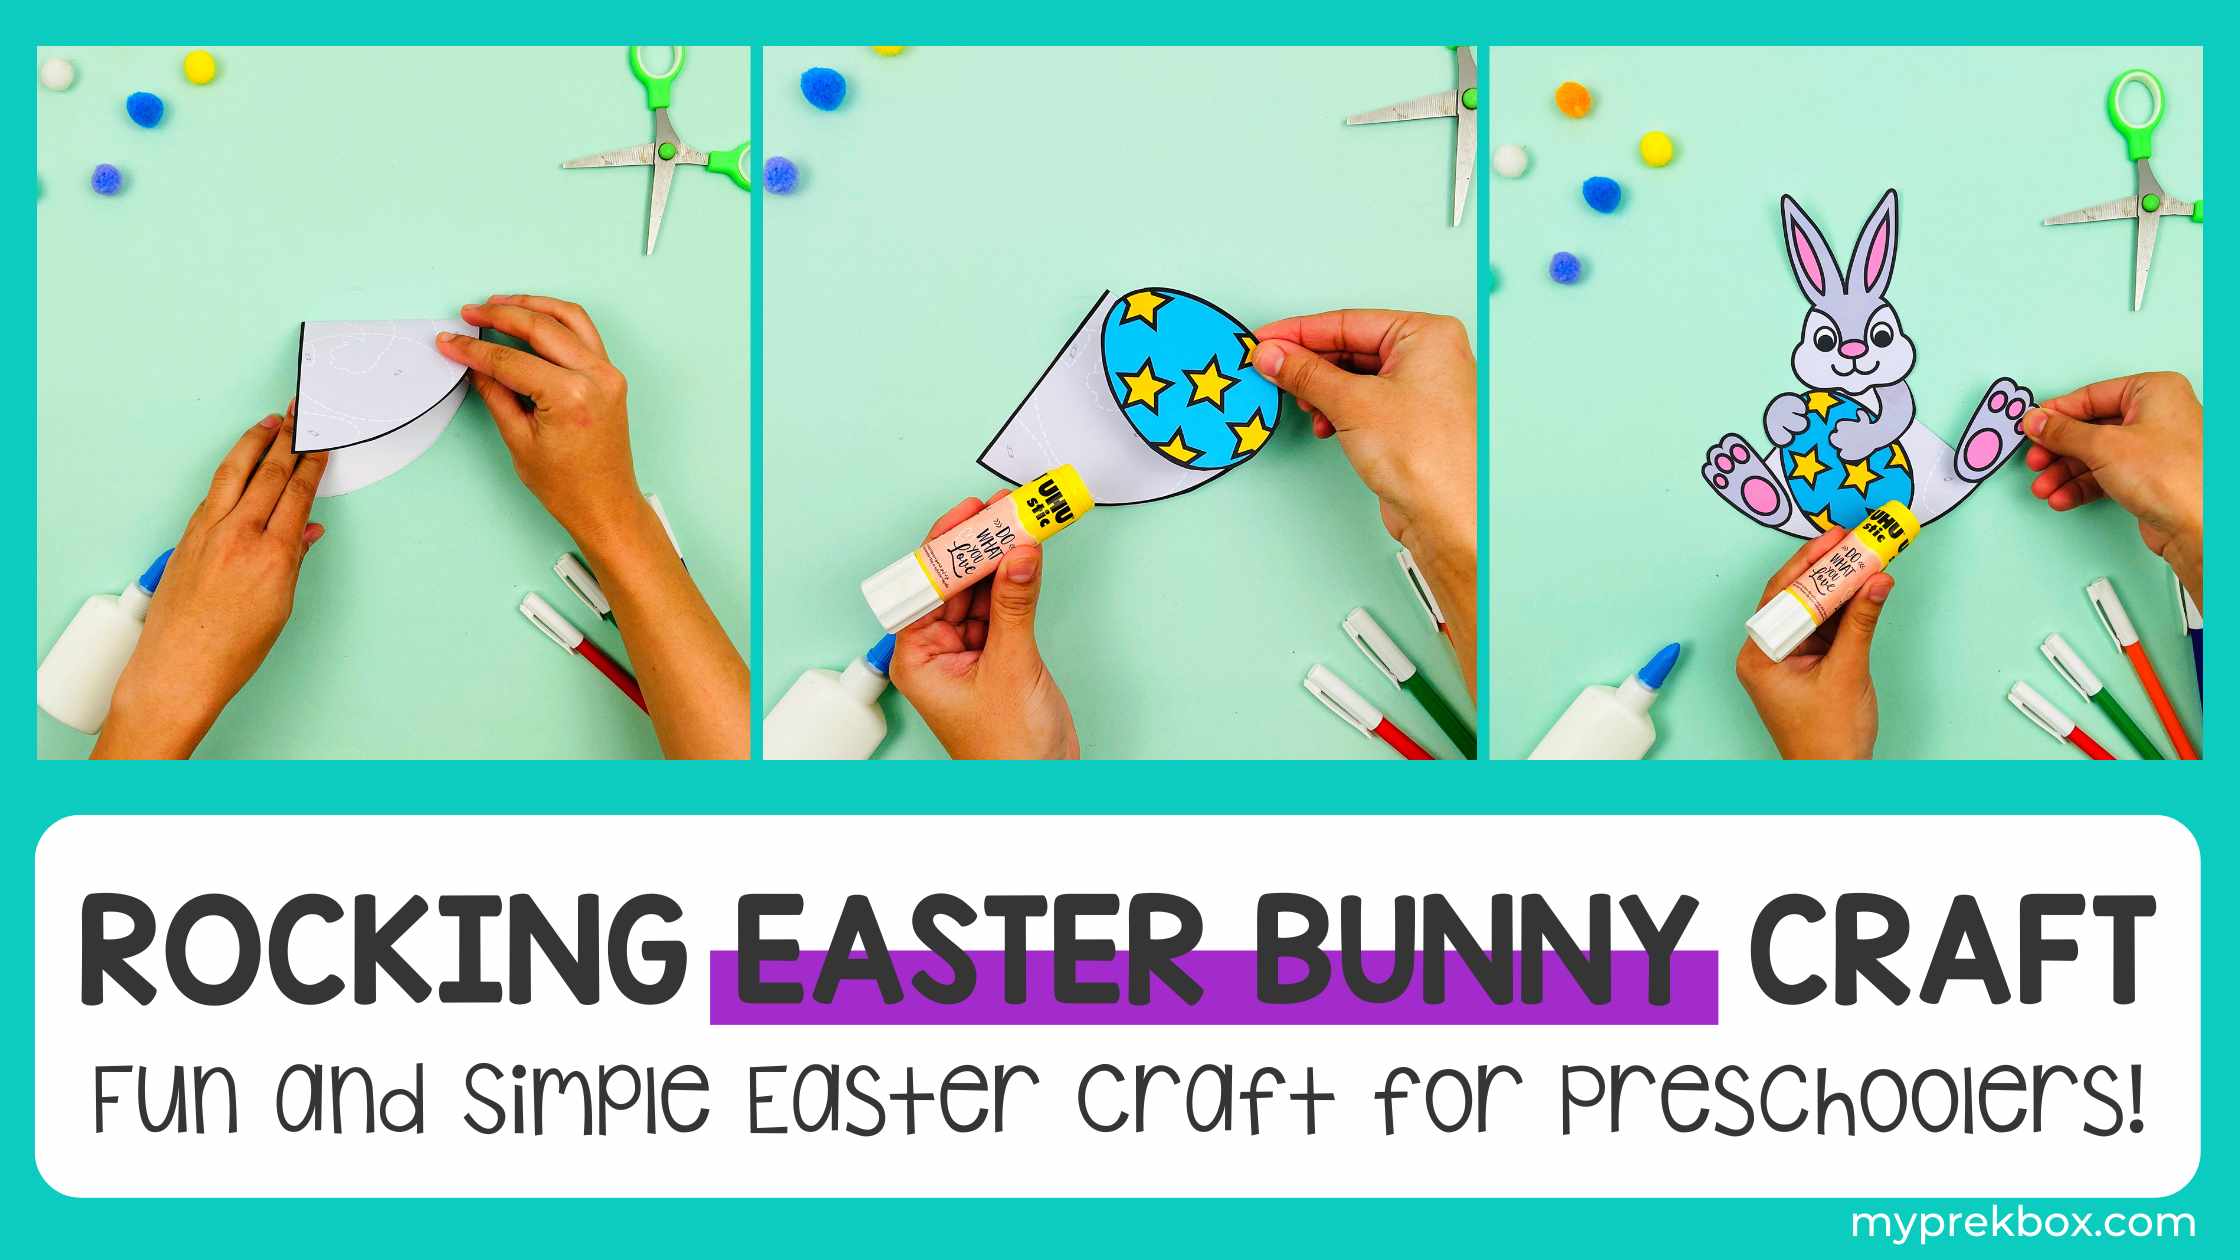 Rocking Easter Bunny Craft